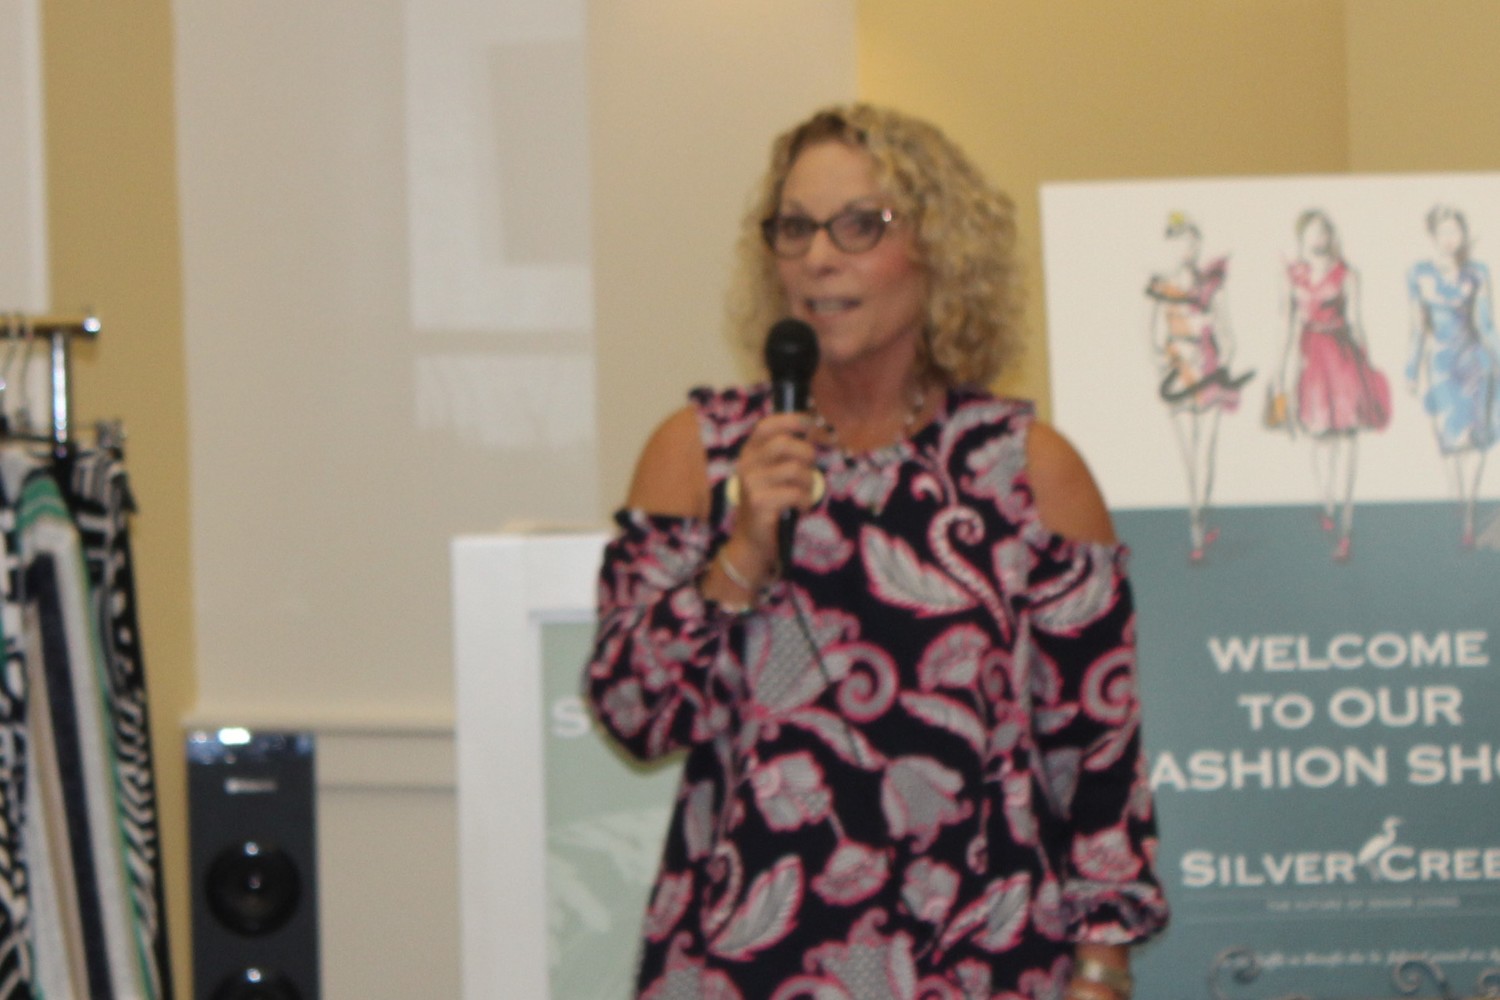 Silver Creek Community Outreach Coordinator Ilene Thrasher addresses those in attendance at the fashion show.